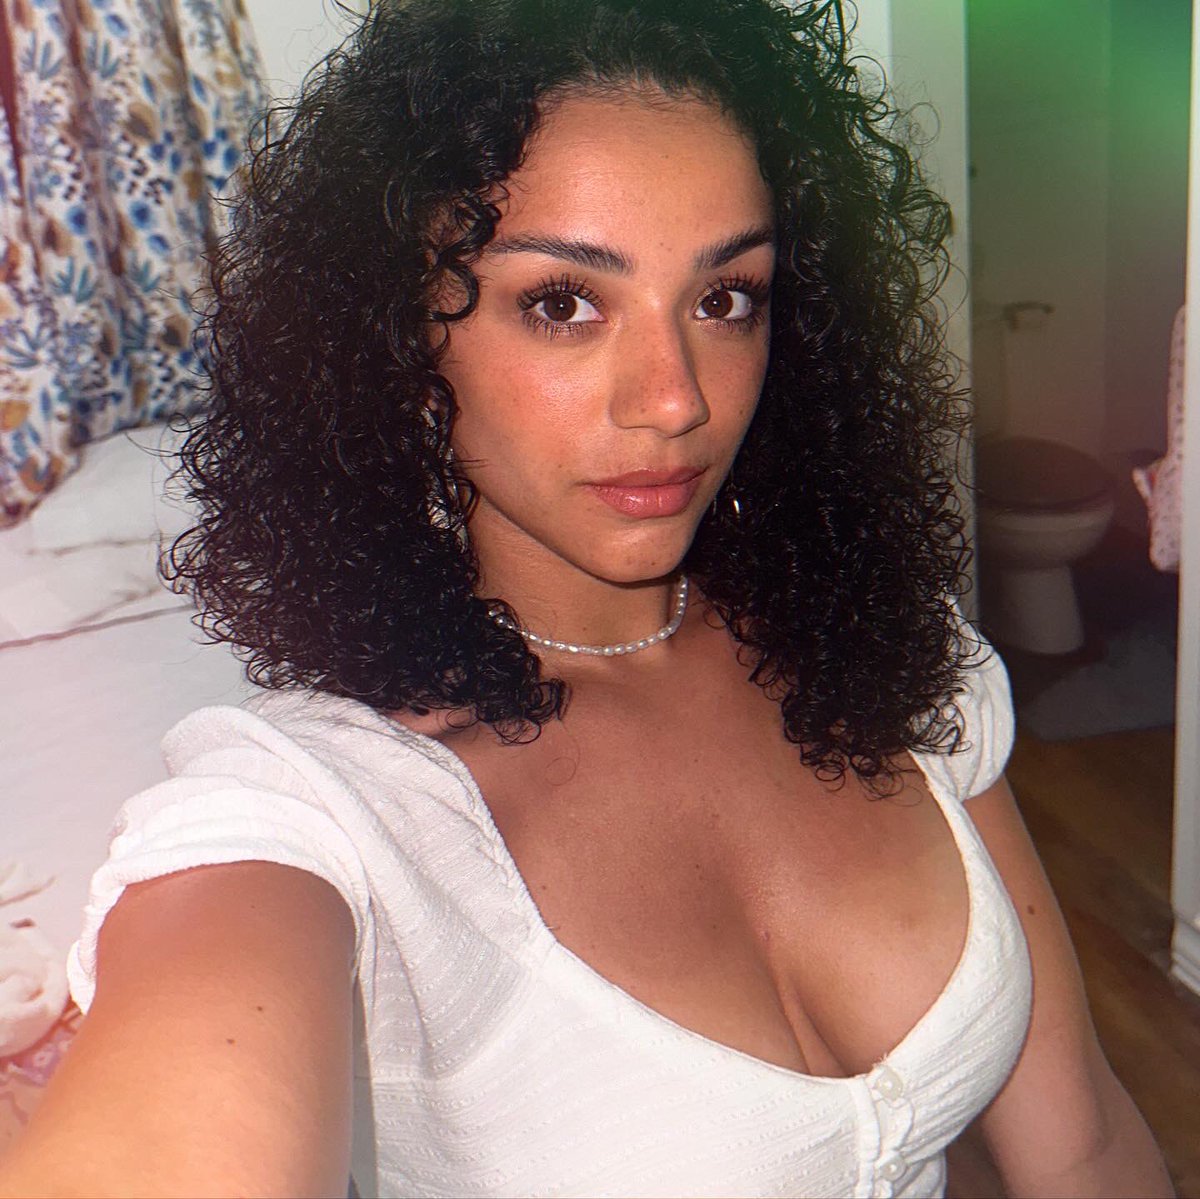 Been working on some exciting things🥰 took a trip to Barbados to relax for a moment… so here’s a lil selfiedump😅🐒